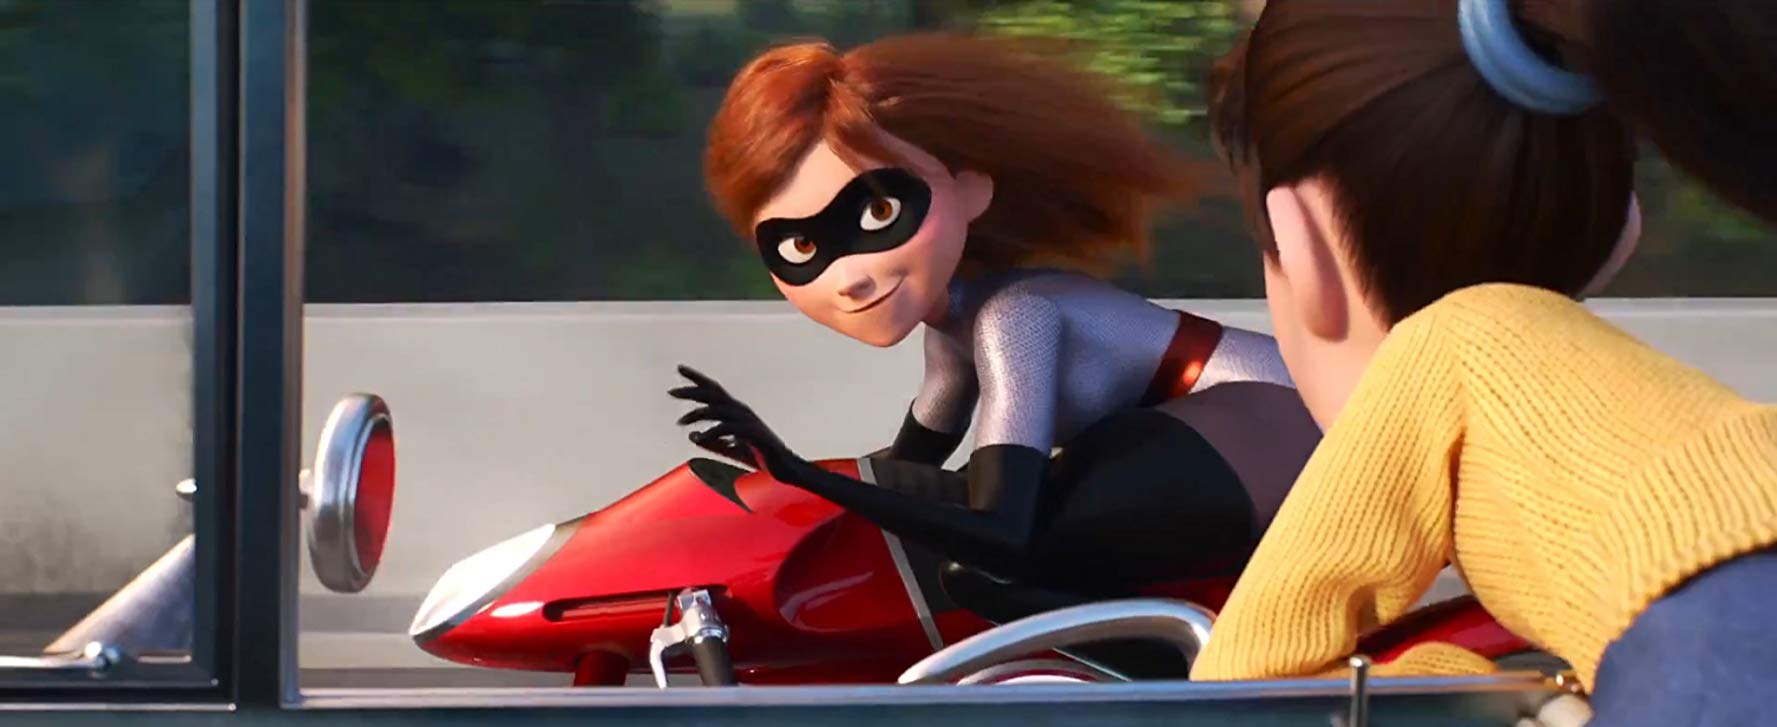 While riding her motorcycle, Elastigirl smiles at a girl in a nearby car before speeding away.